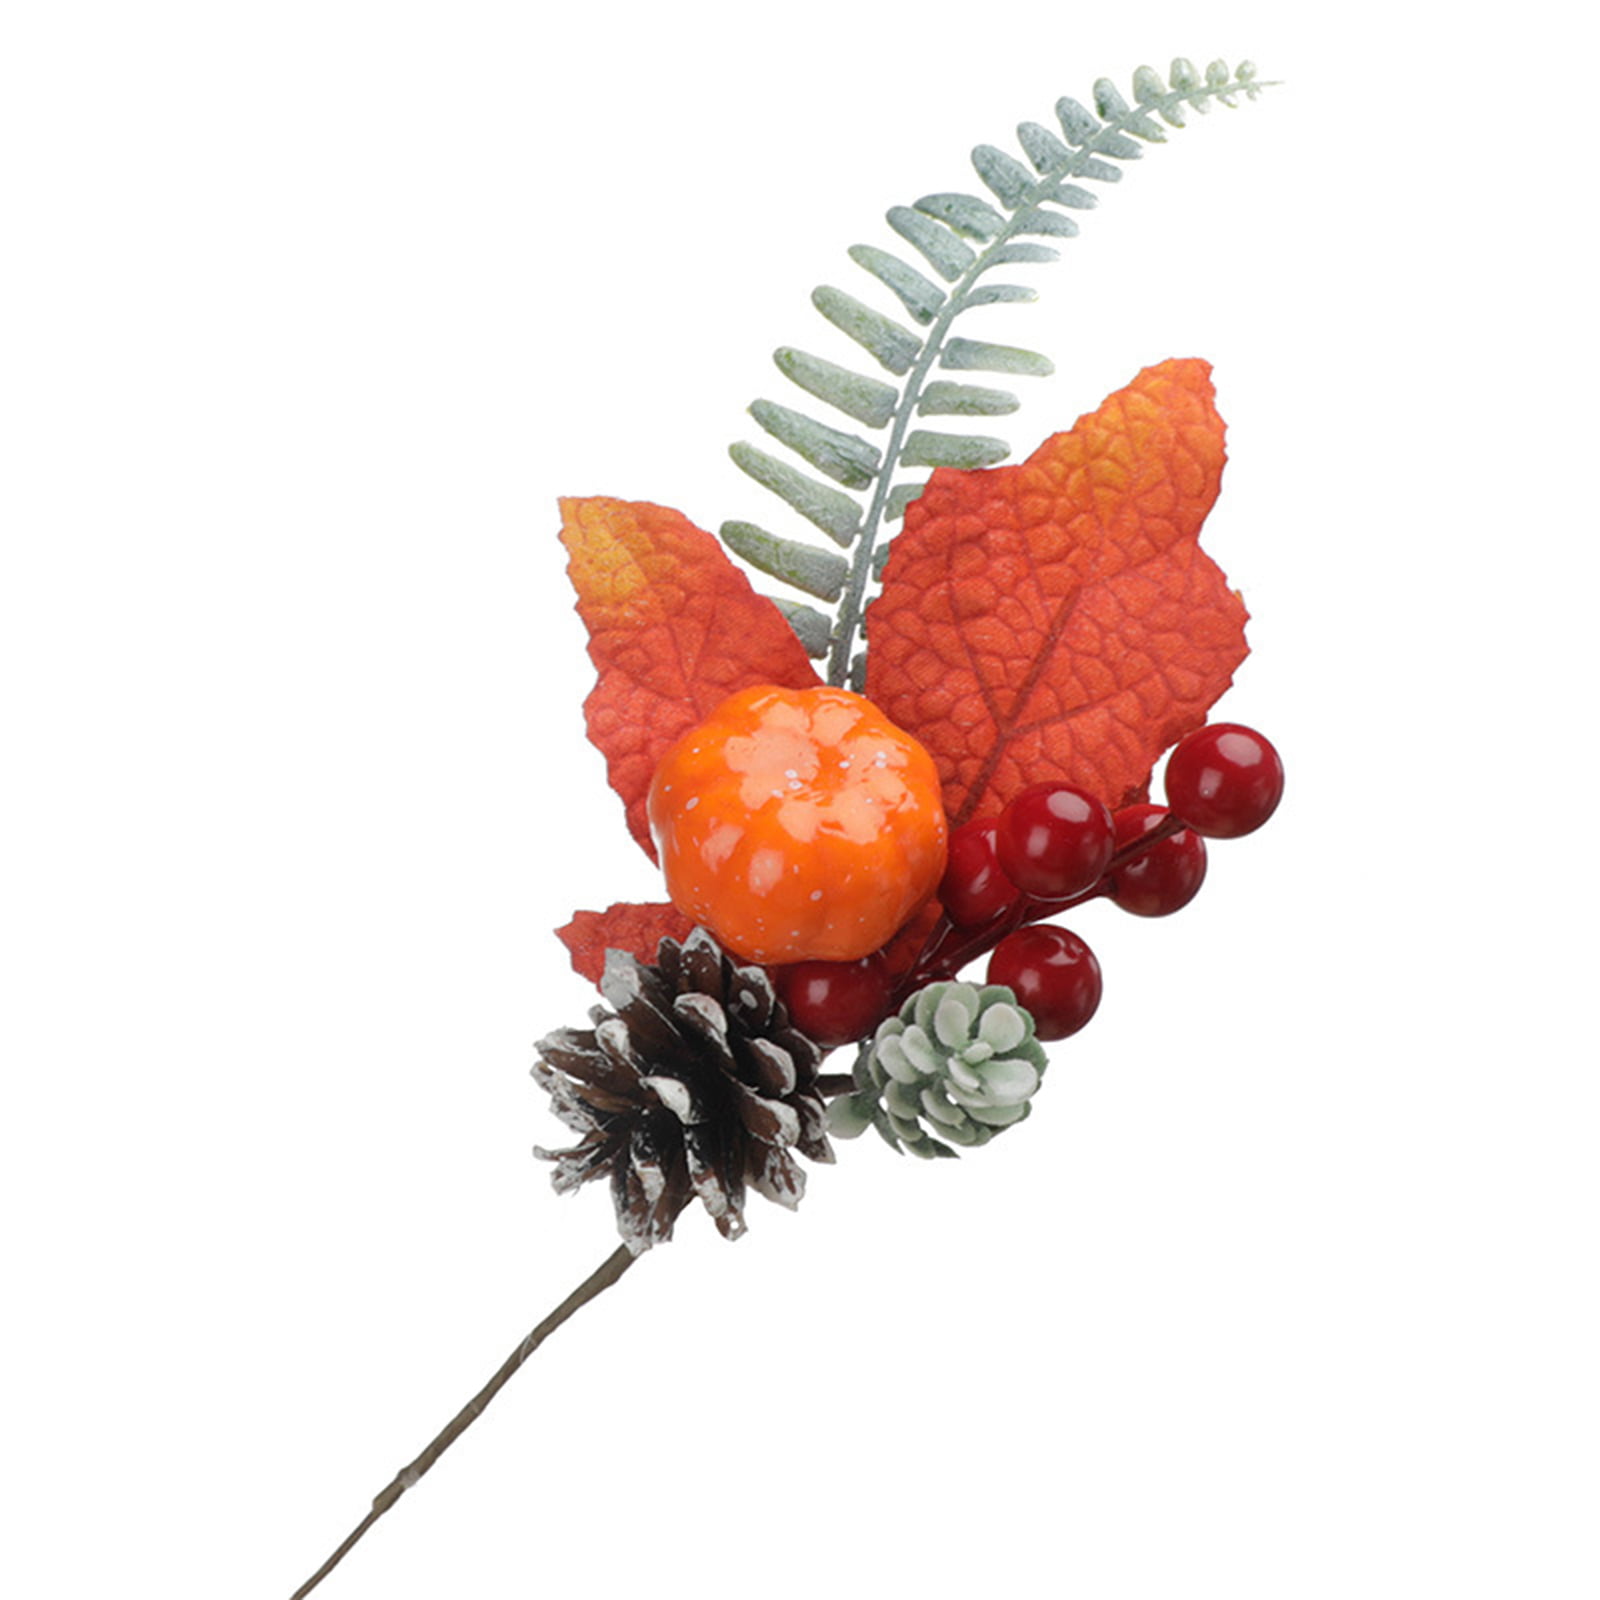 Yixiang 12Pack Artificial Christmas Picks Assorted Red Berry Picks Stems Faux Pine Picks Spray with Pinecones Apples Holly Leaves for Christmas